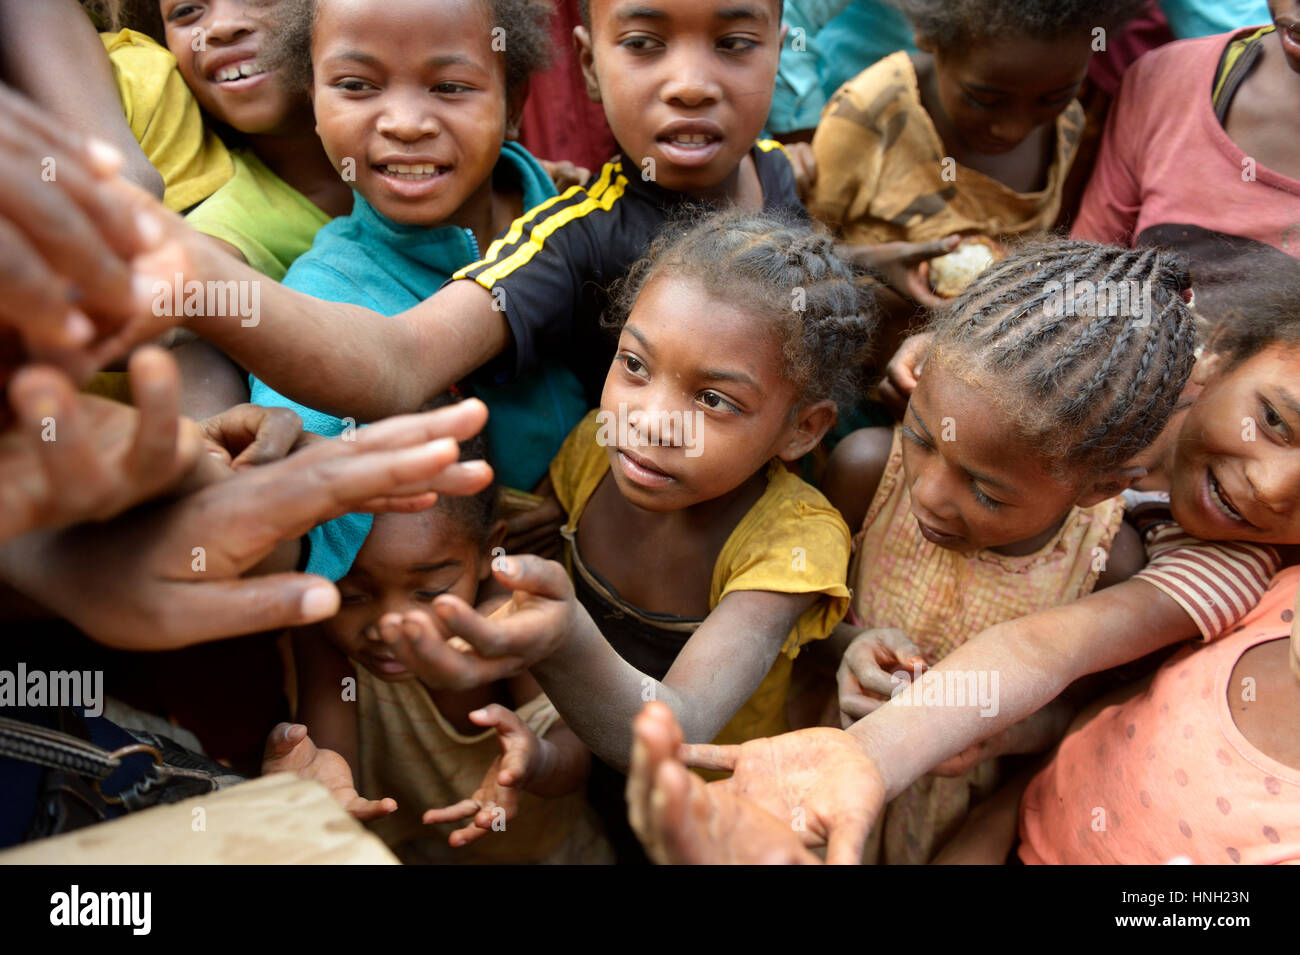 Hungry children with outstretched hands, Analakely village, Tanambao commune, Madagascar Stock Photo